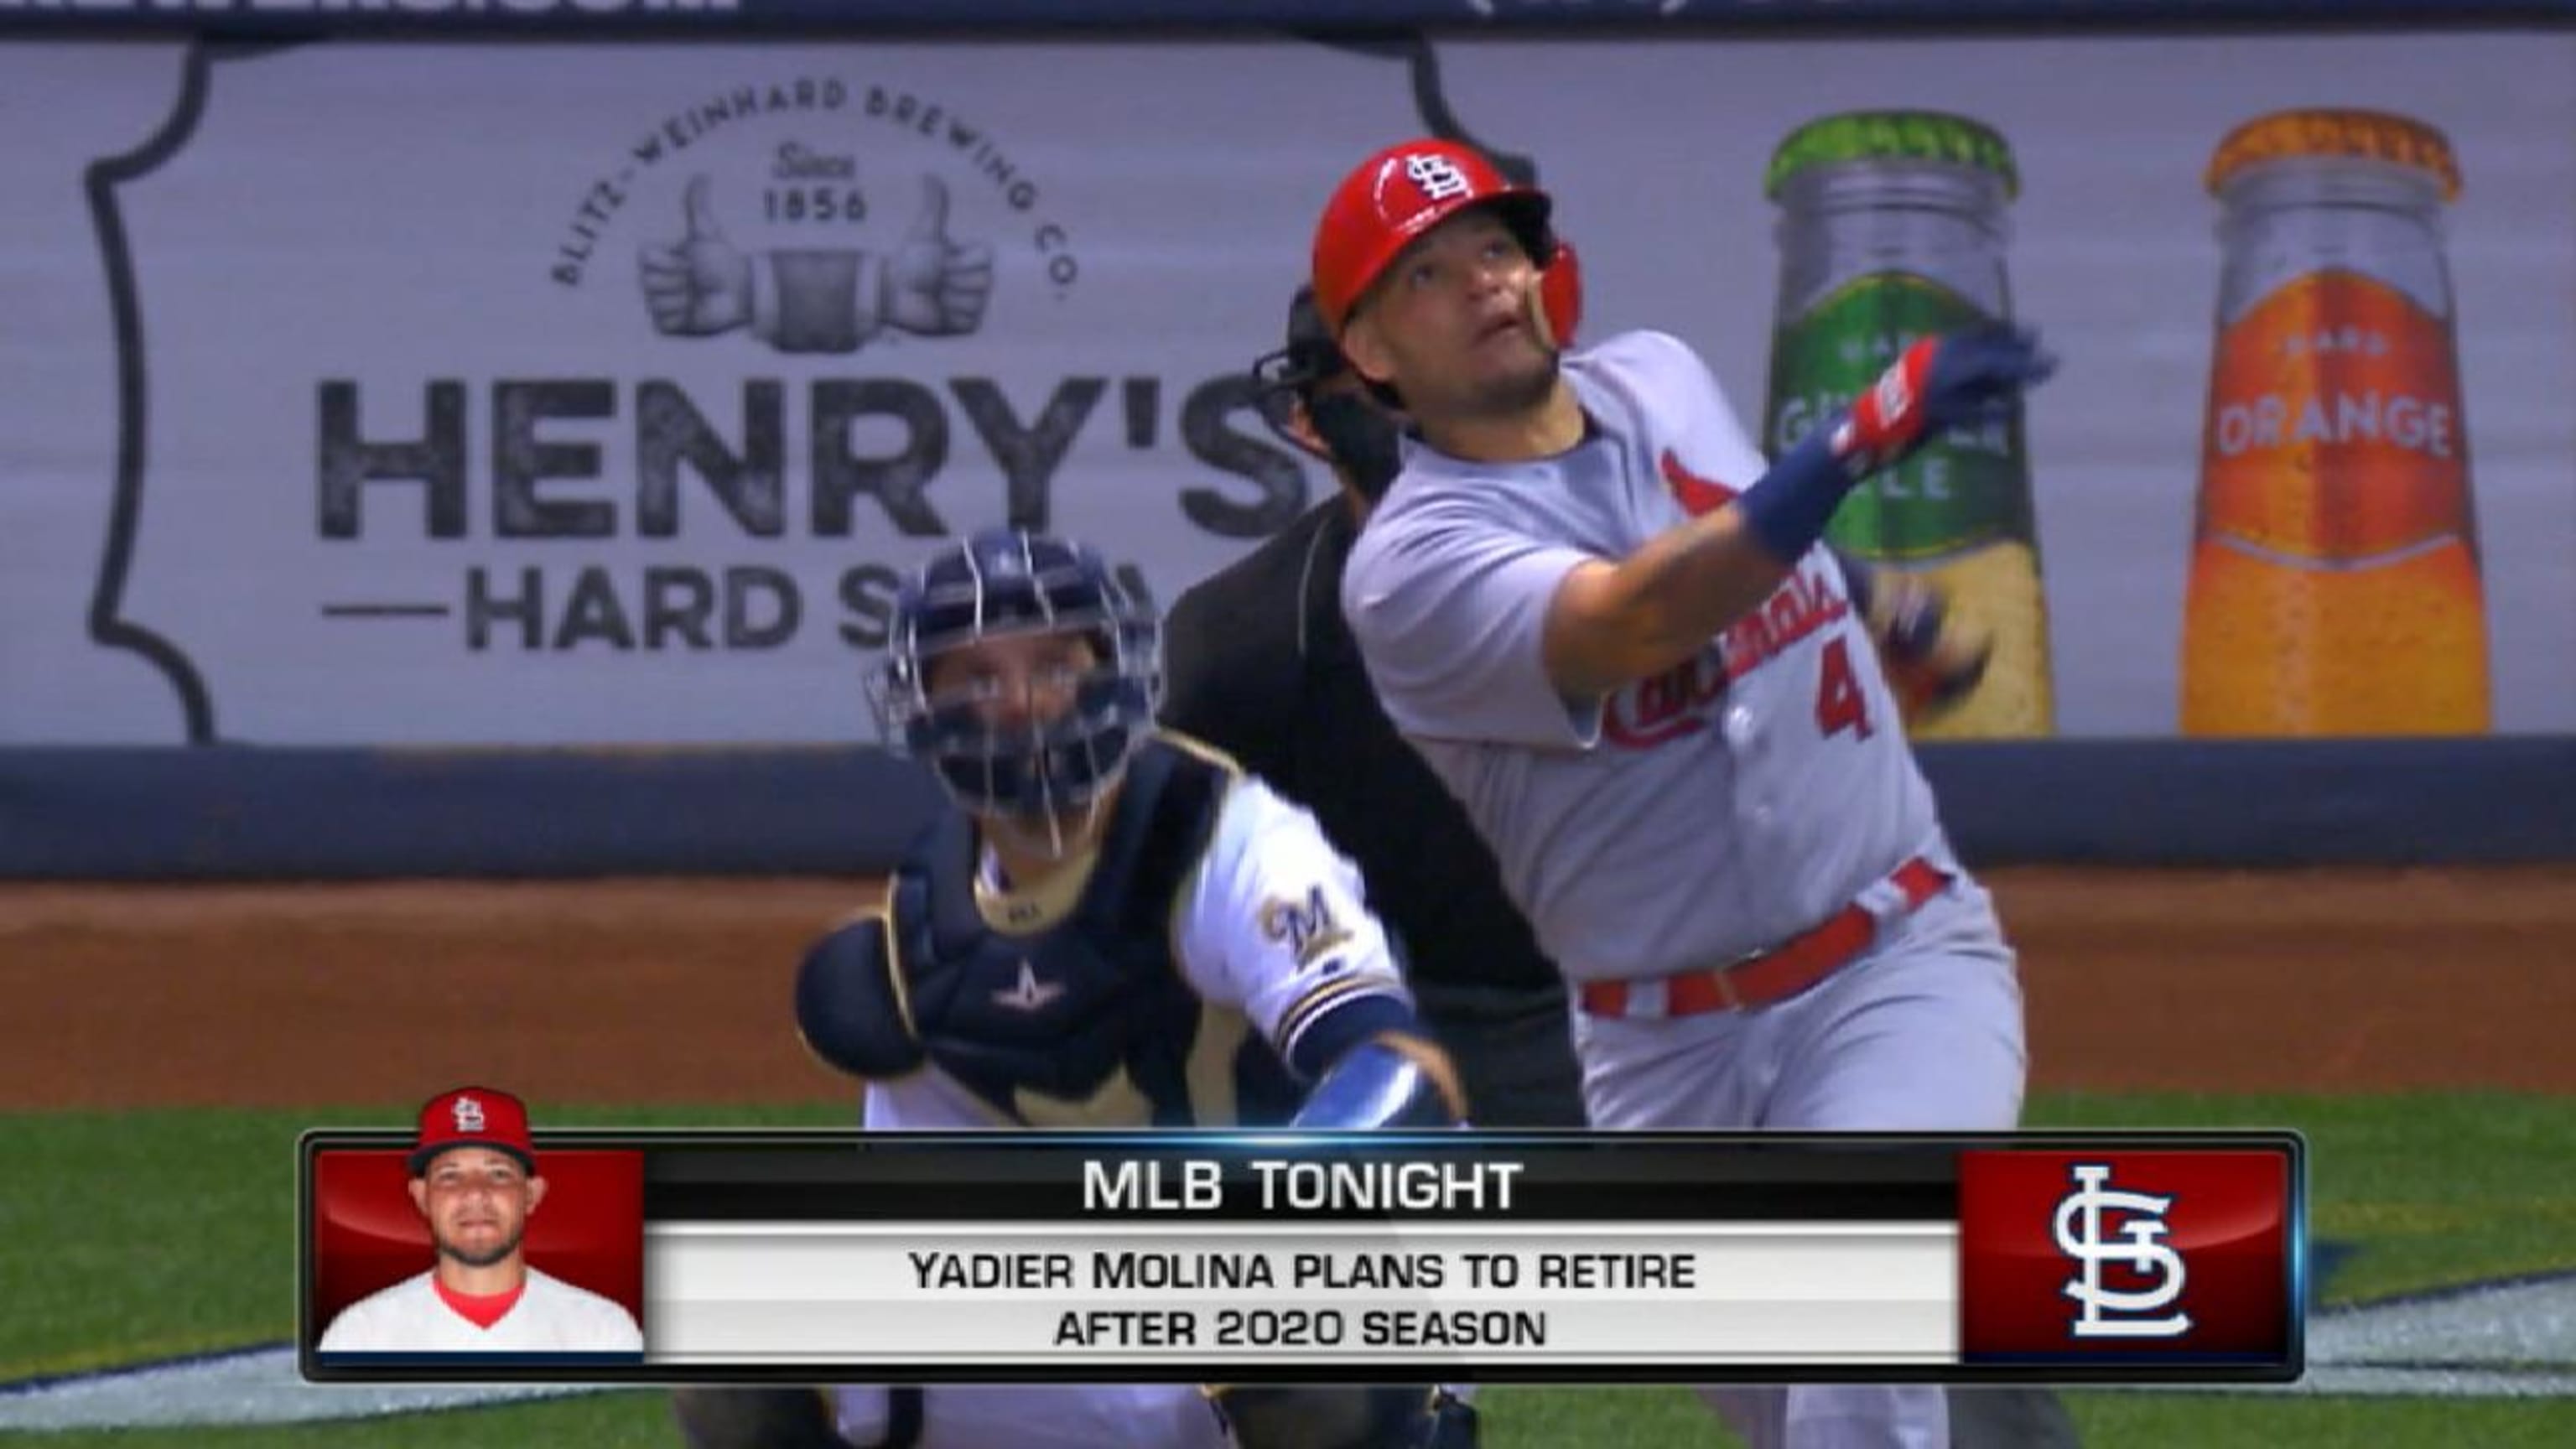 Yadier Molina plans to retire after deal is up